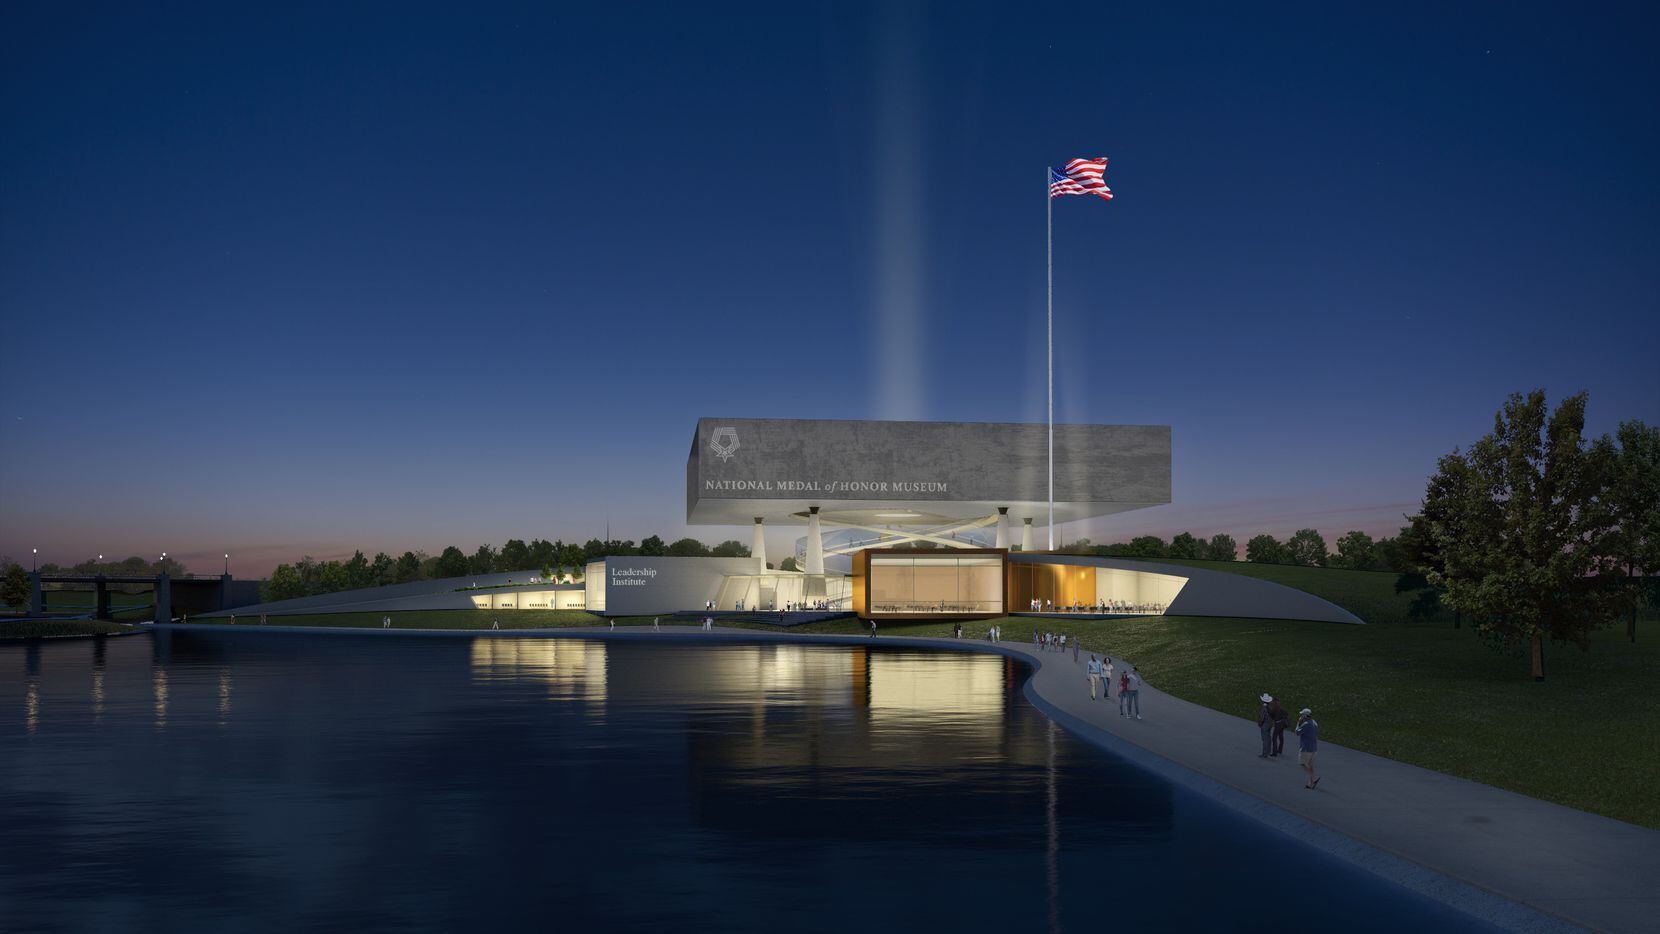 A rendering of the National Medal of Honor Museum expected to open in 2024 in Arlington.